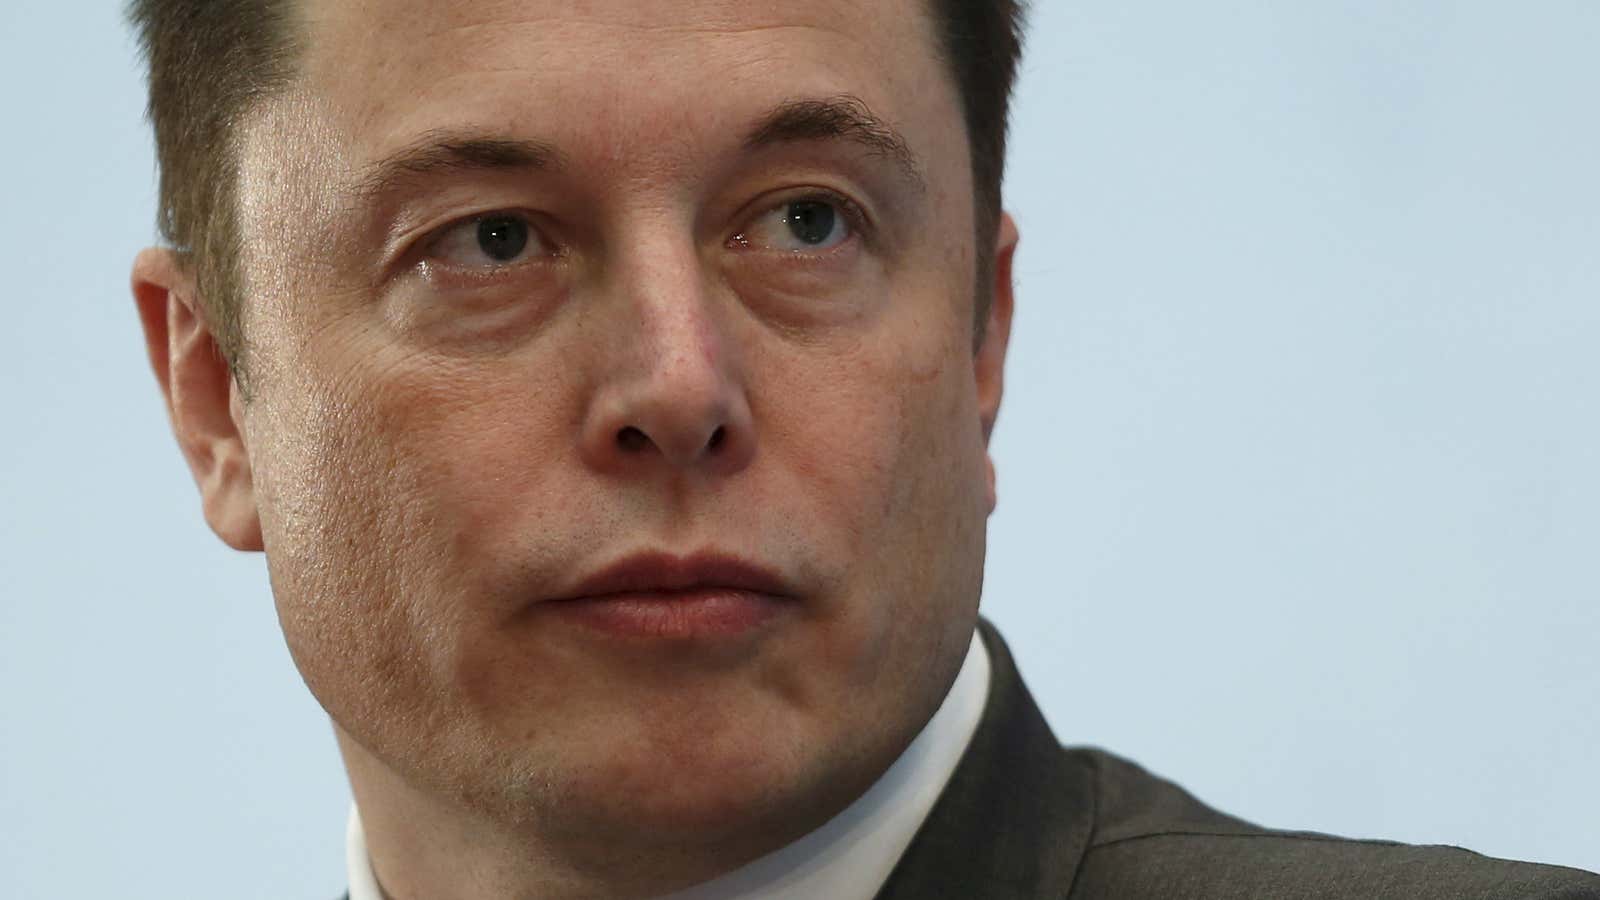 Is Musk a visionary or a madman?